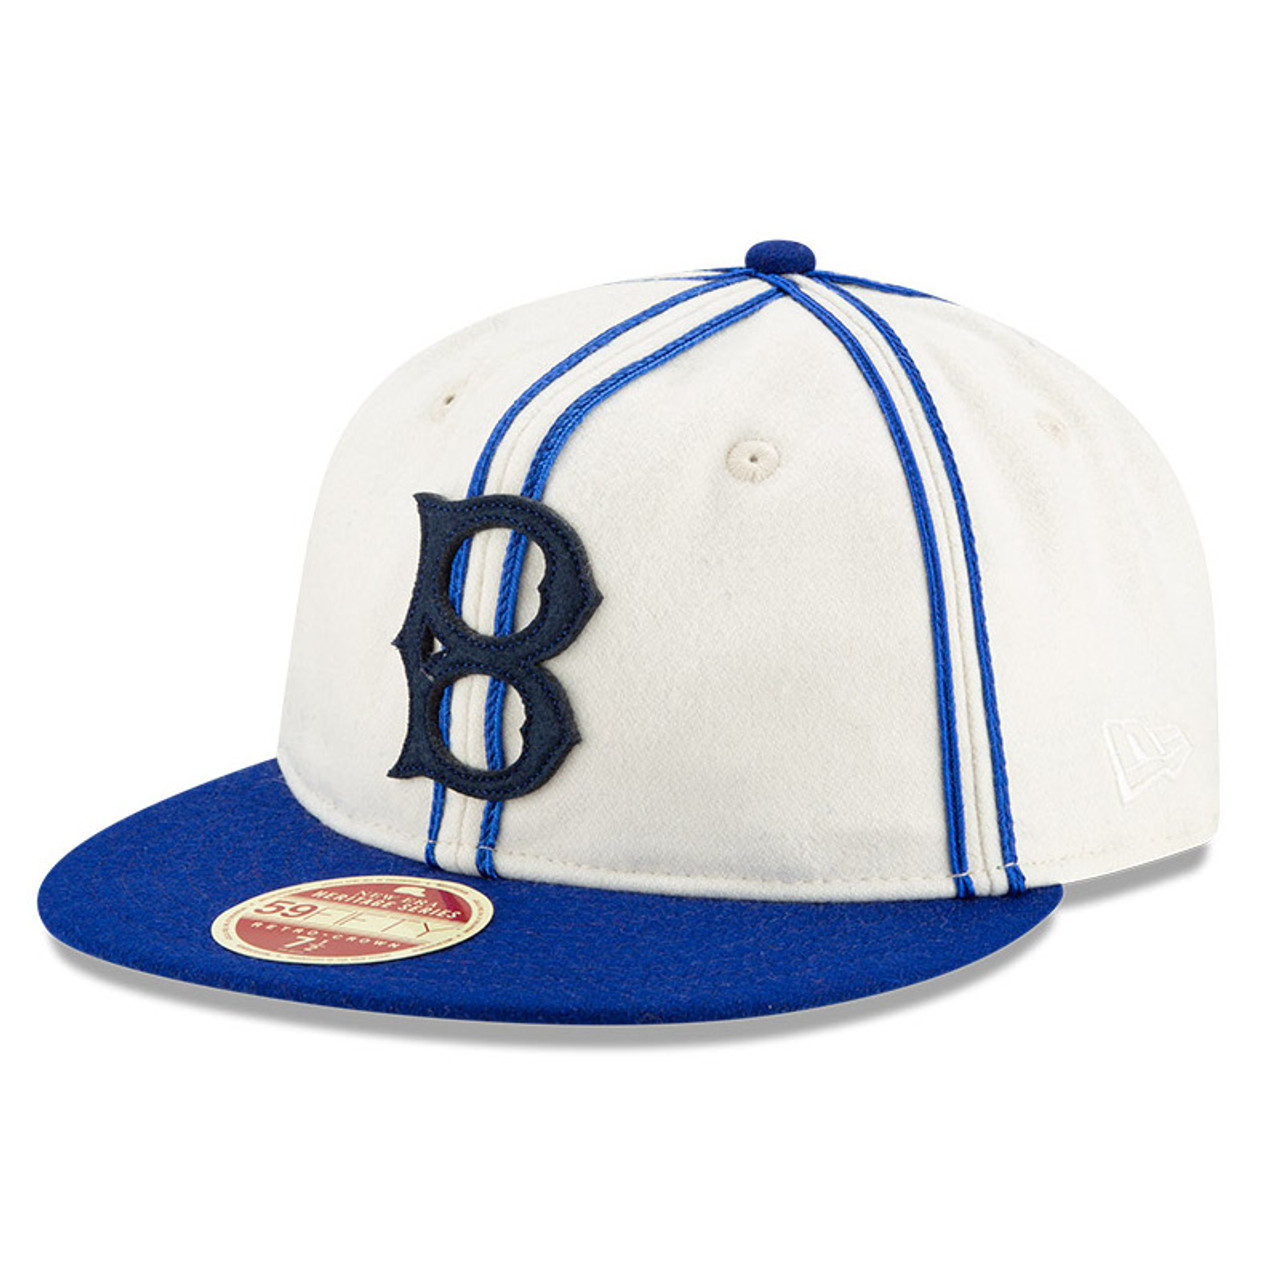 Brooklyn Dodgers 1912 Royal 59Fifty Fitted Hat by MLB x New Era